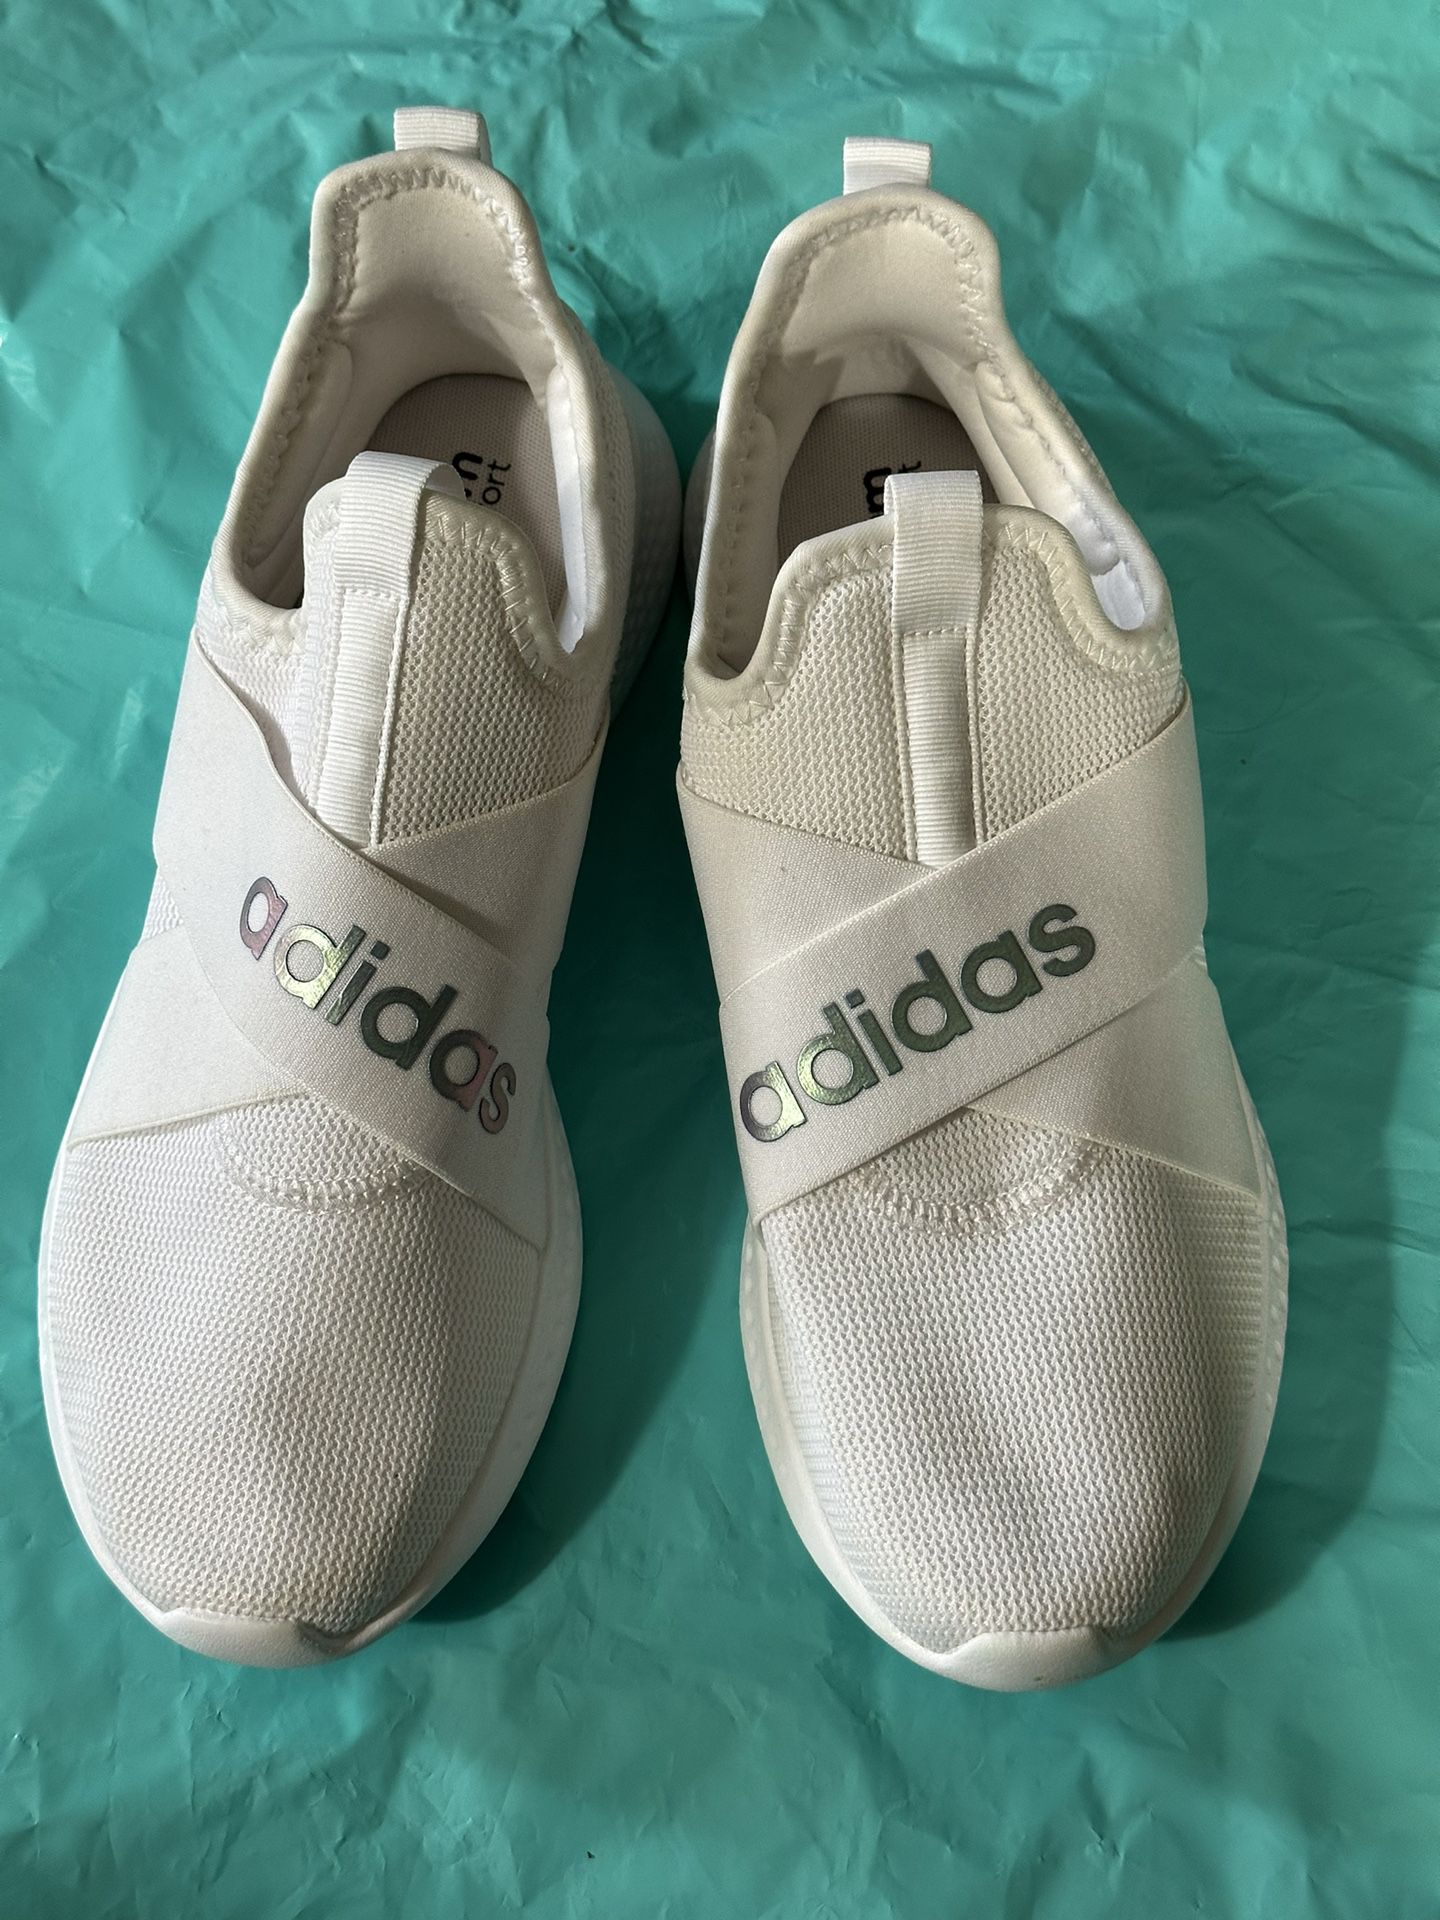 New Adidas Cloudfoam Comfort Sneaker Tennis Shoes Running Size 10 NWOTB Excellent Quality Shoes 